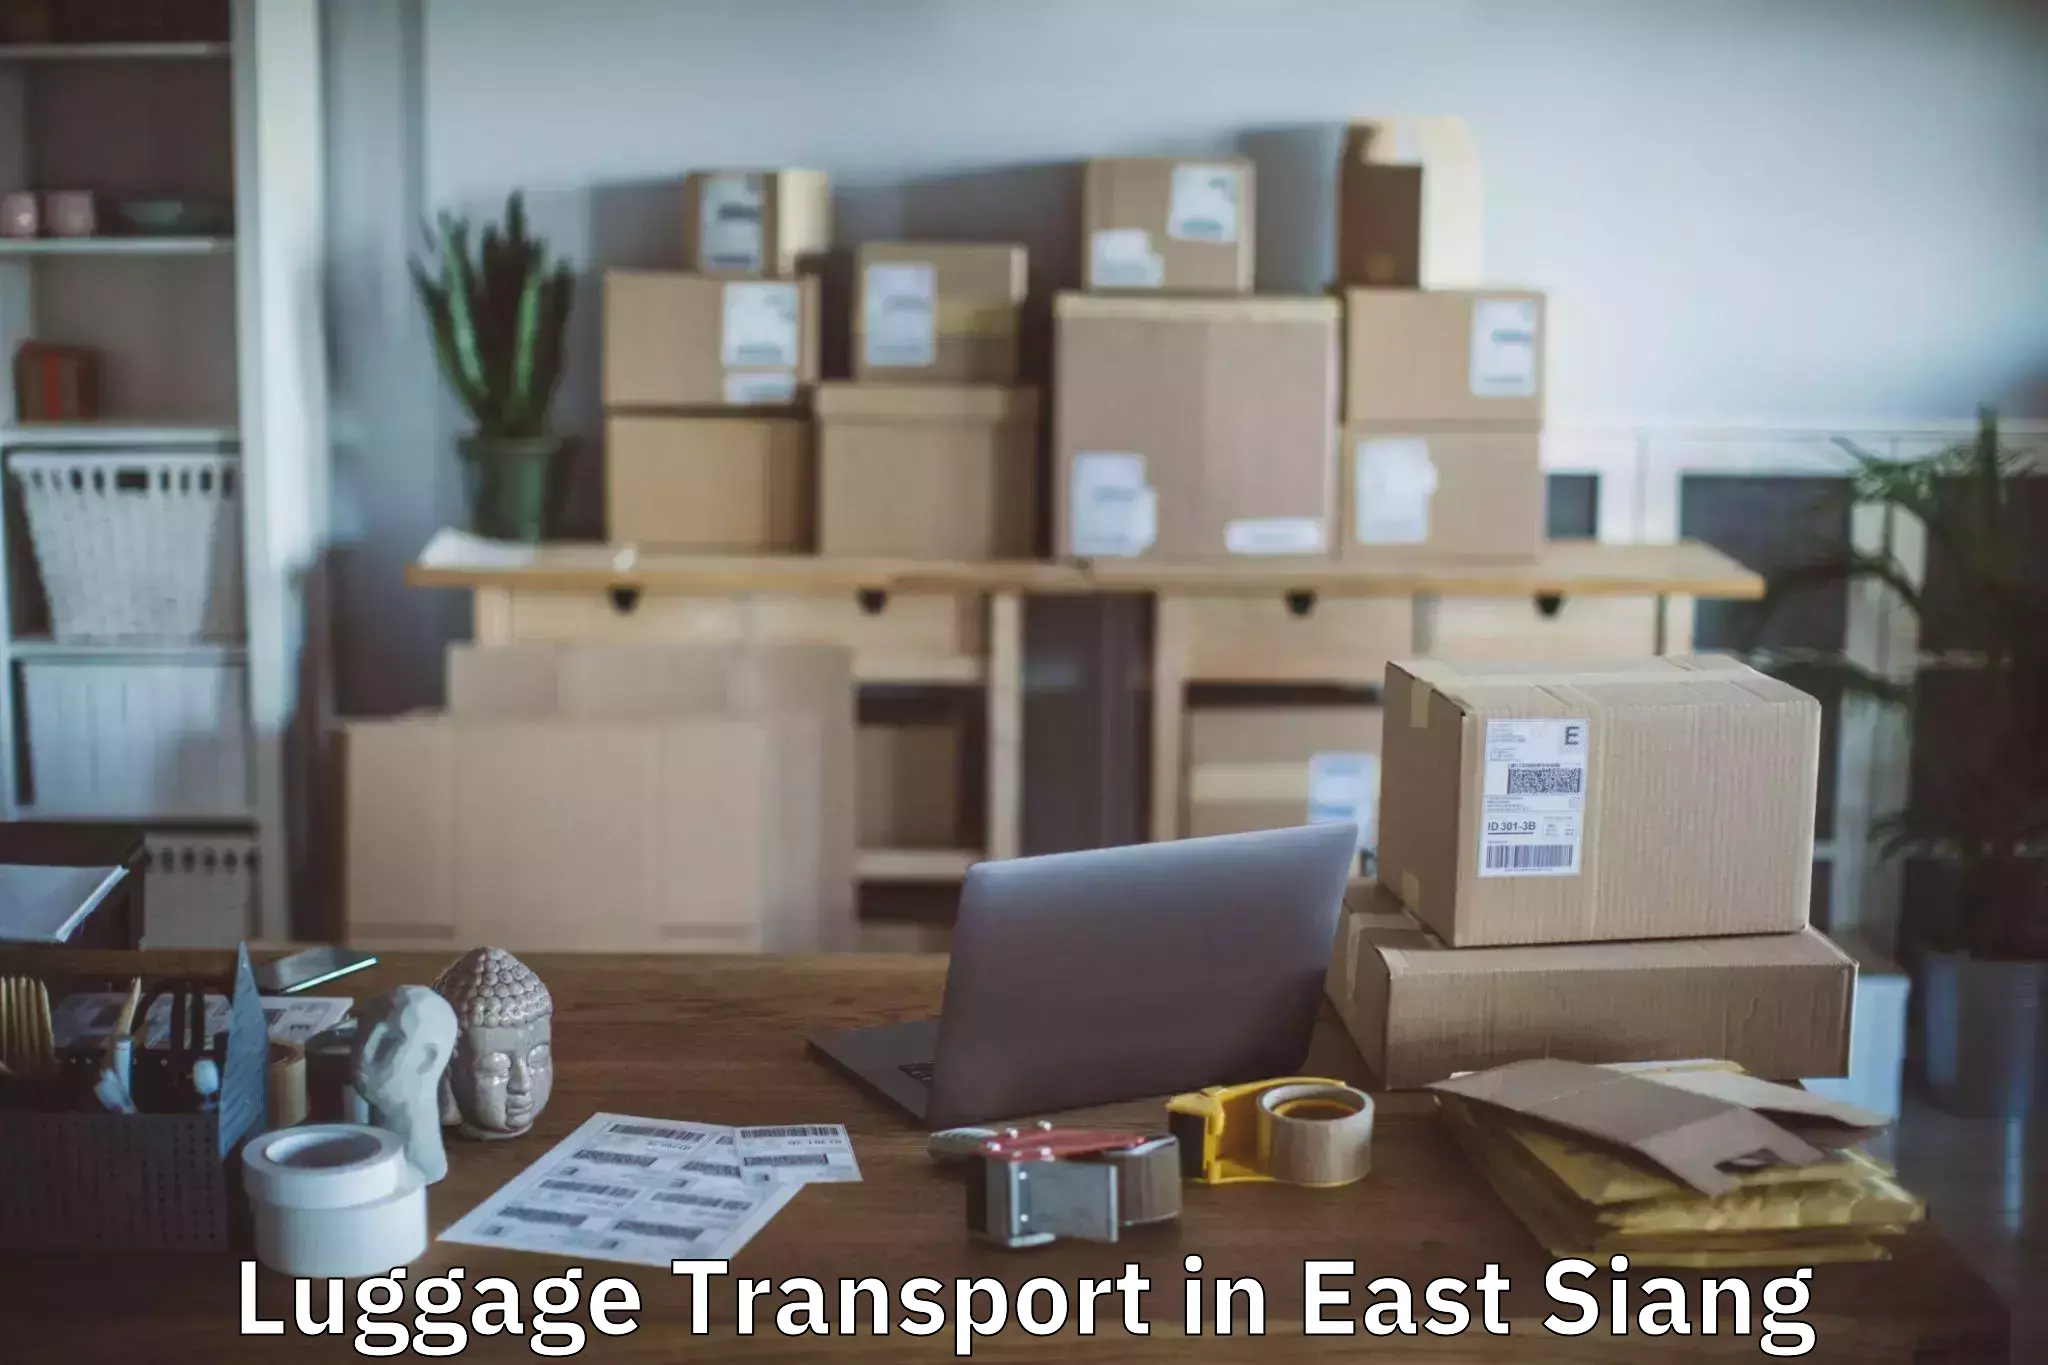 Luggage shipment tracking in East Siang